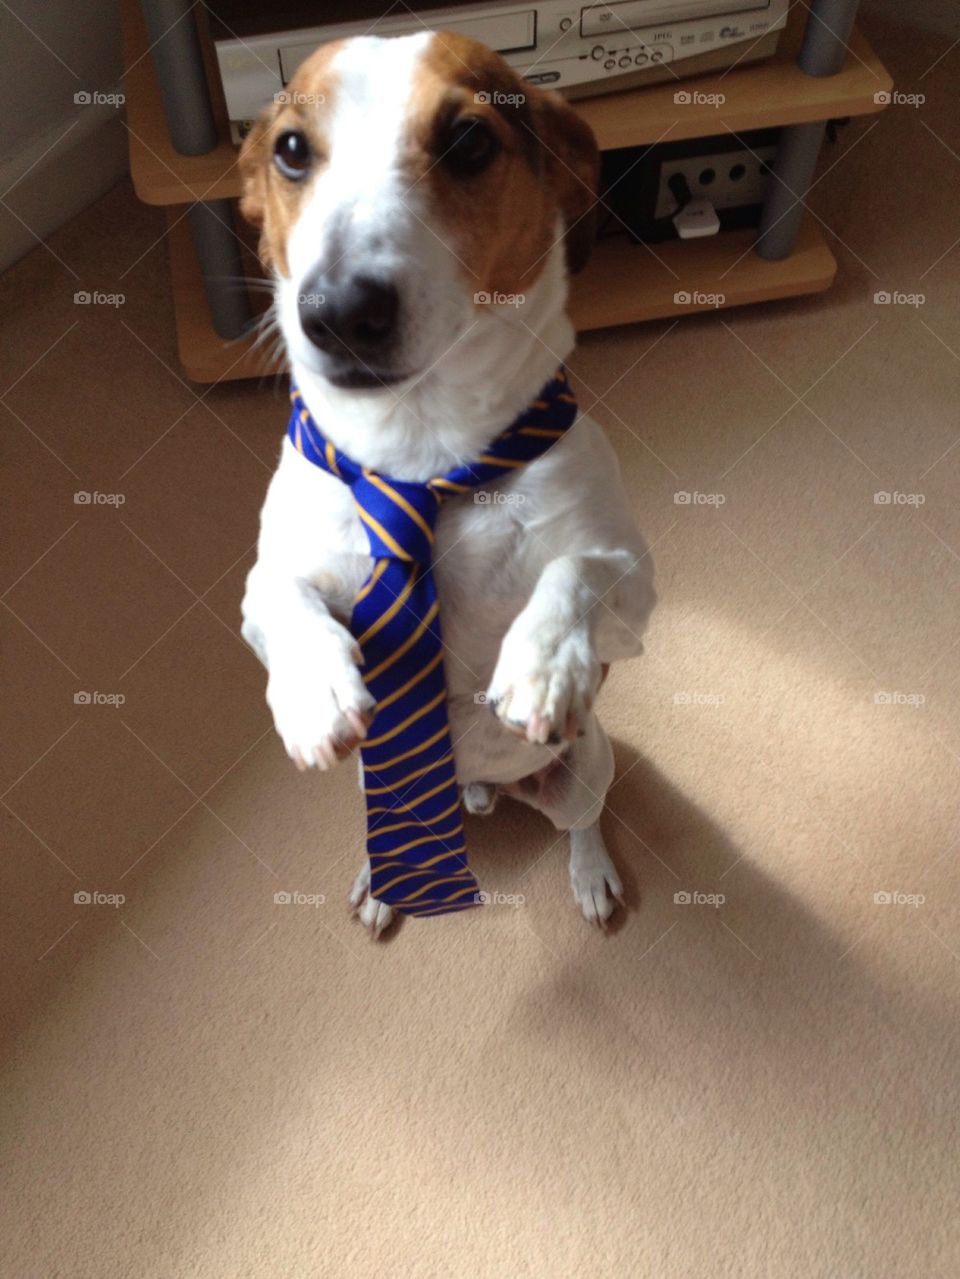 Dog going for a job interview